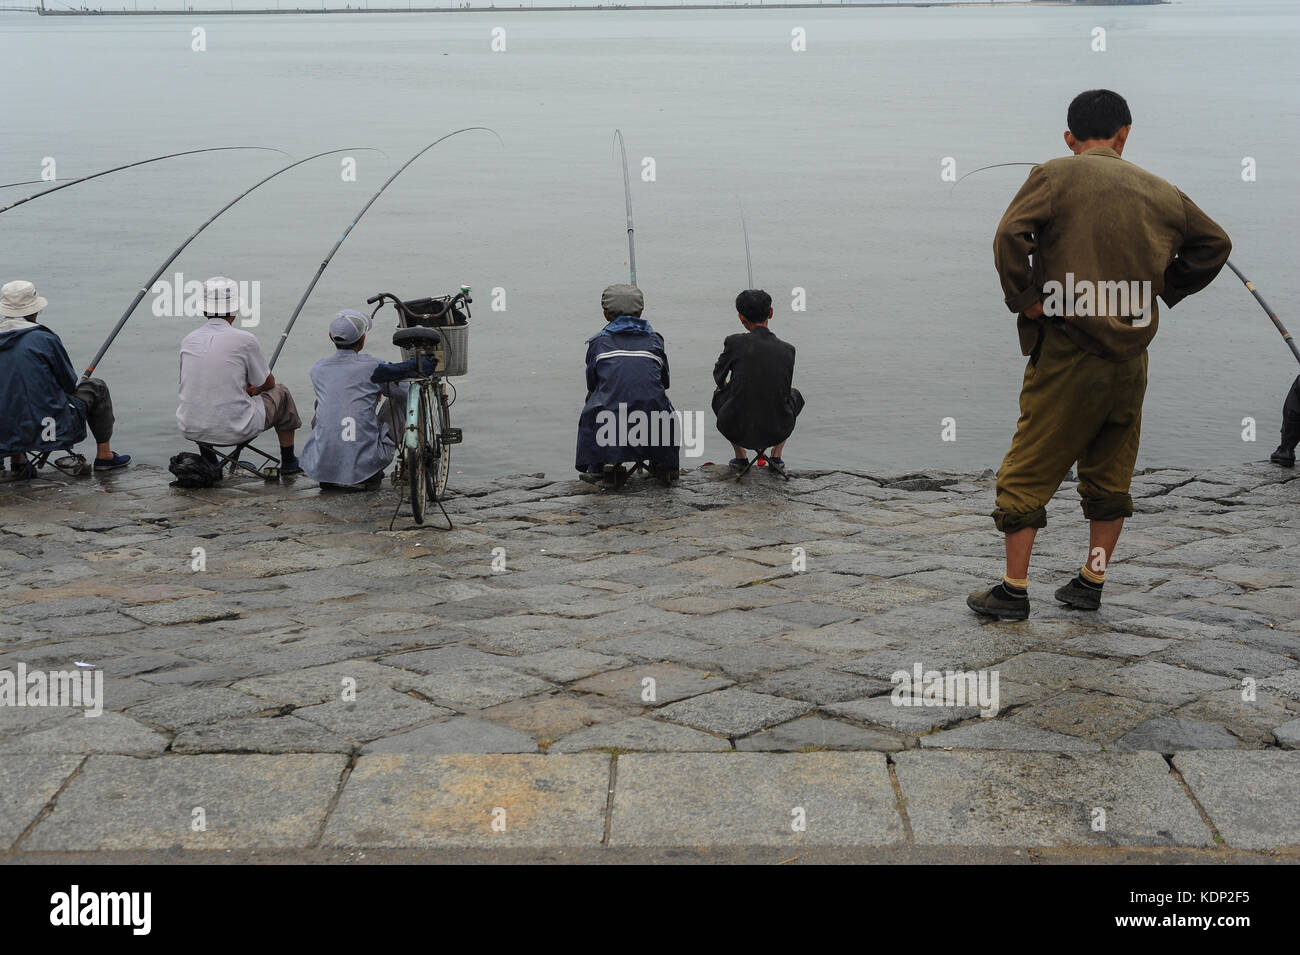 12.08.2012, Wonsan, North Korea, Asia - A North Korean man watches a group of locals fish on a grey and rainy morning in the coastal town of Wonsan. Stock Photo